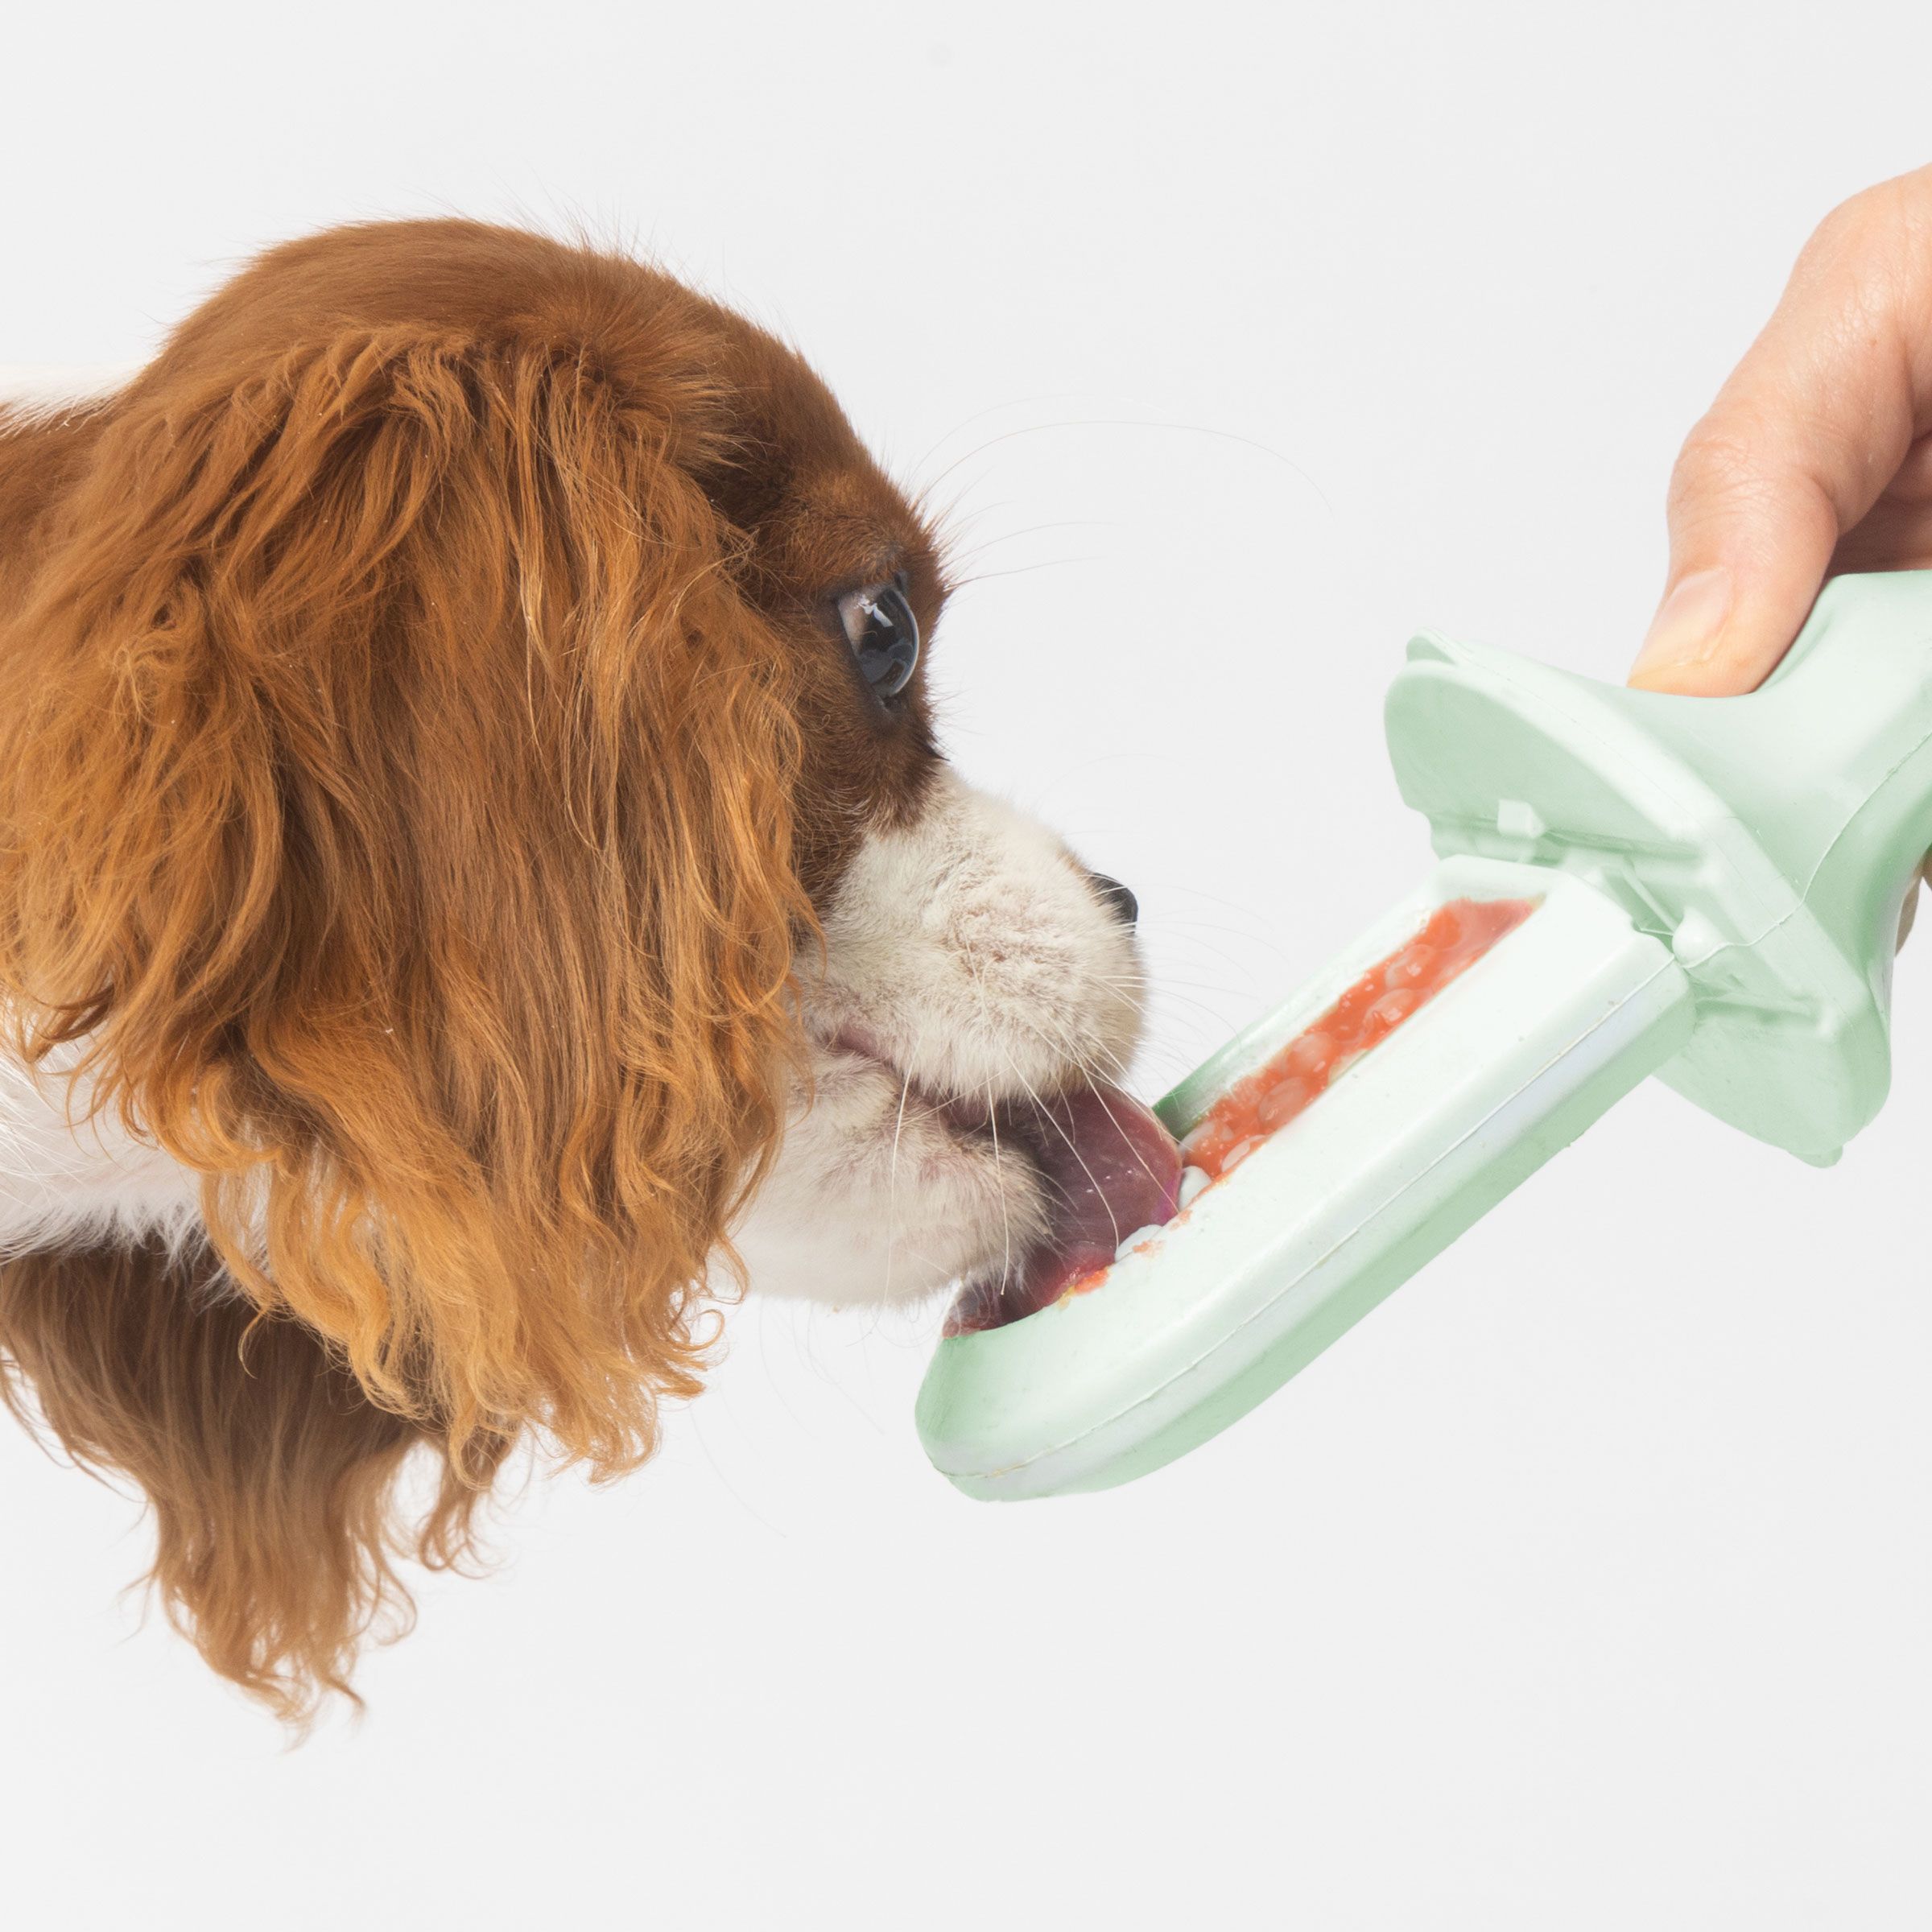 Dog licking Pup-kin Spice Treat Spread off of a Groov Training Aid held by a human